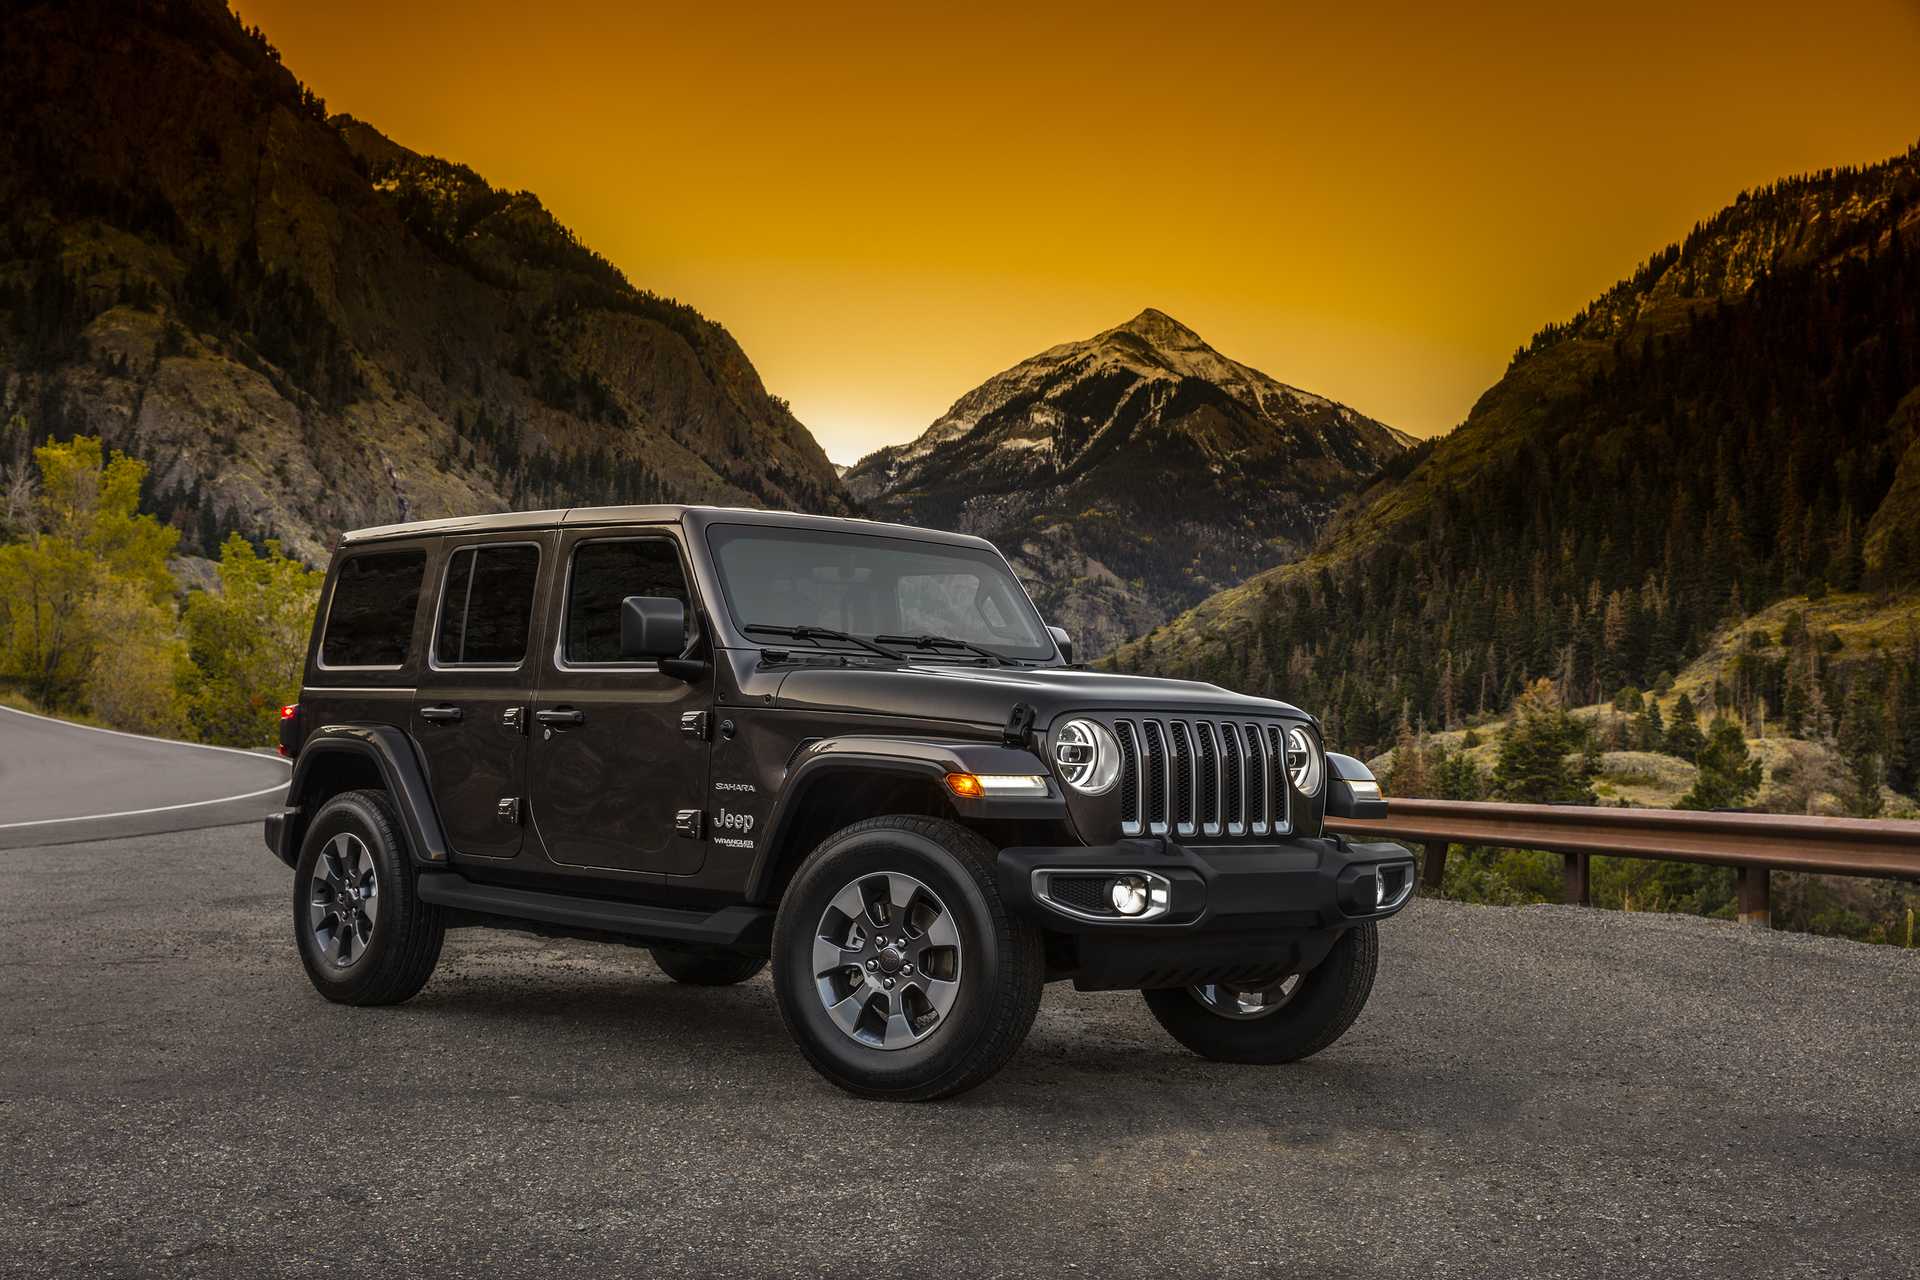 High Quality Tuning Files Jeep Wrangler 3.0 Ecodiesel 264hp